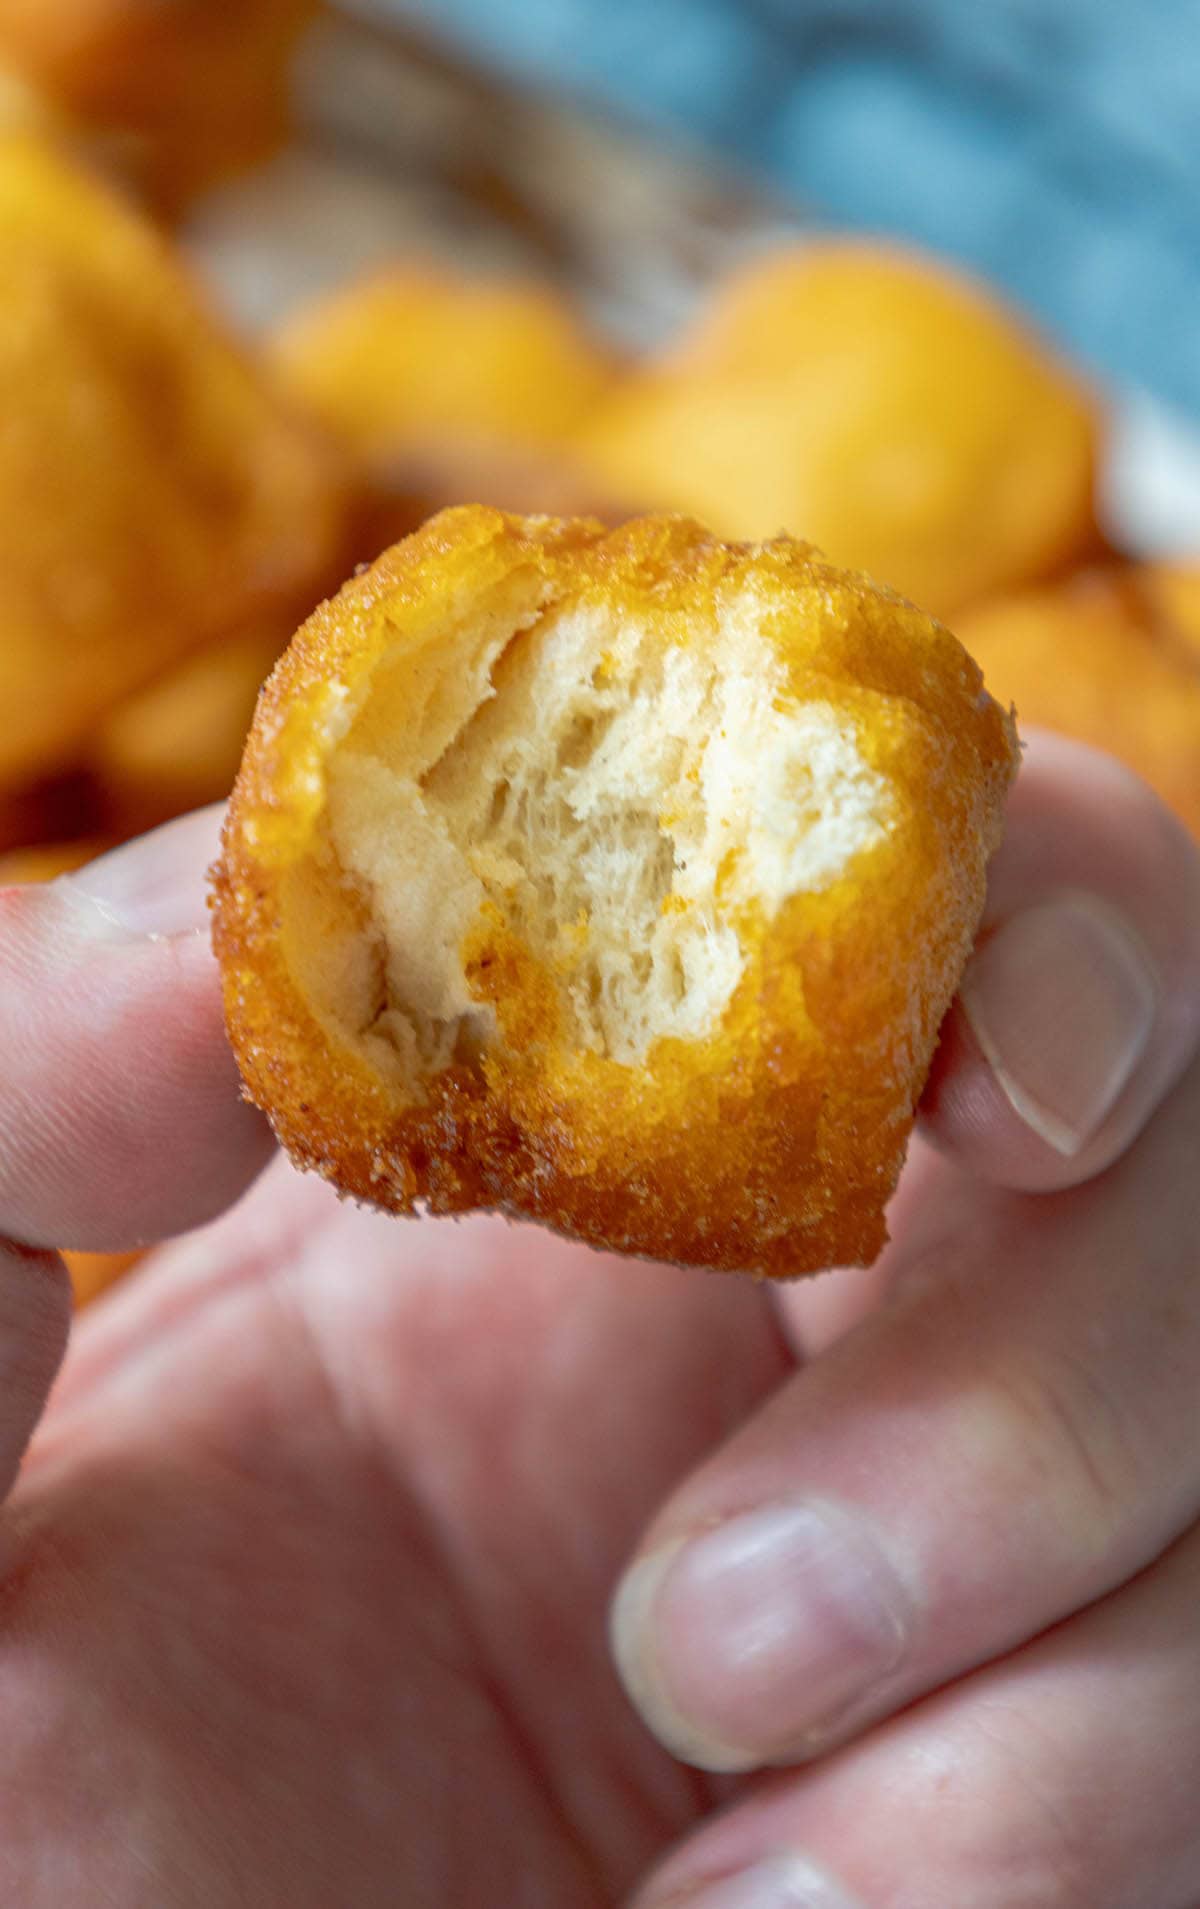 A person's hand holding a bite of a fried doughnut.